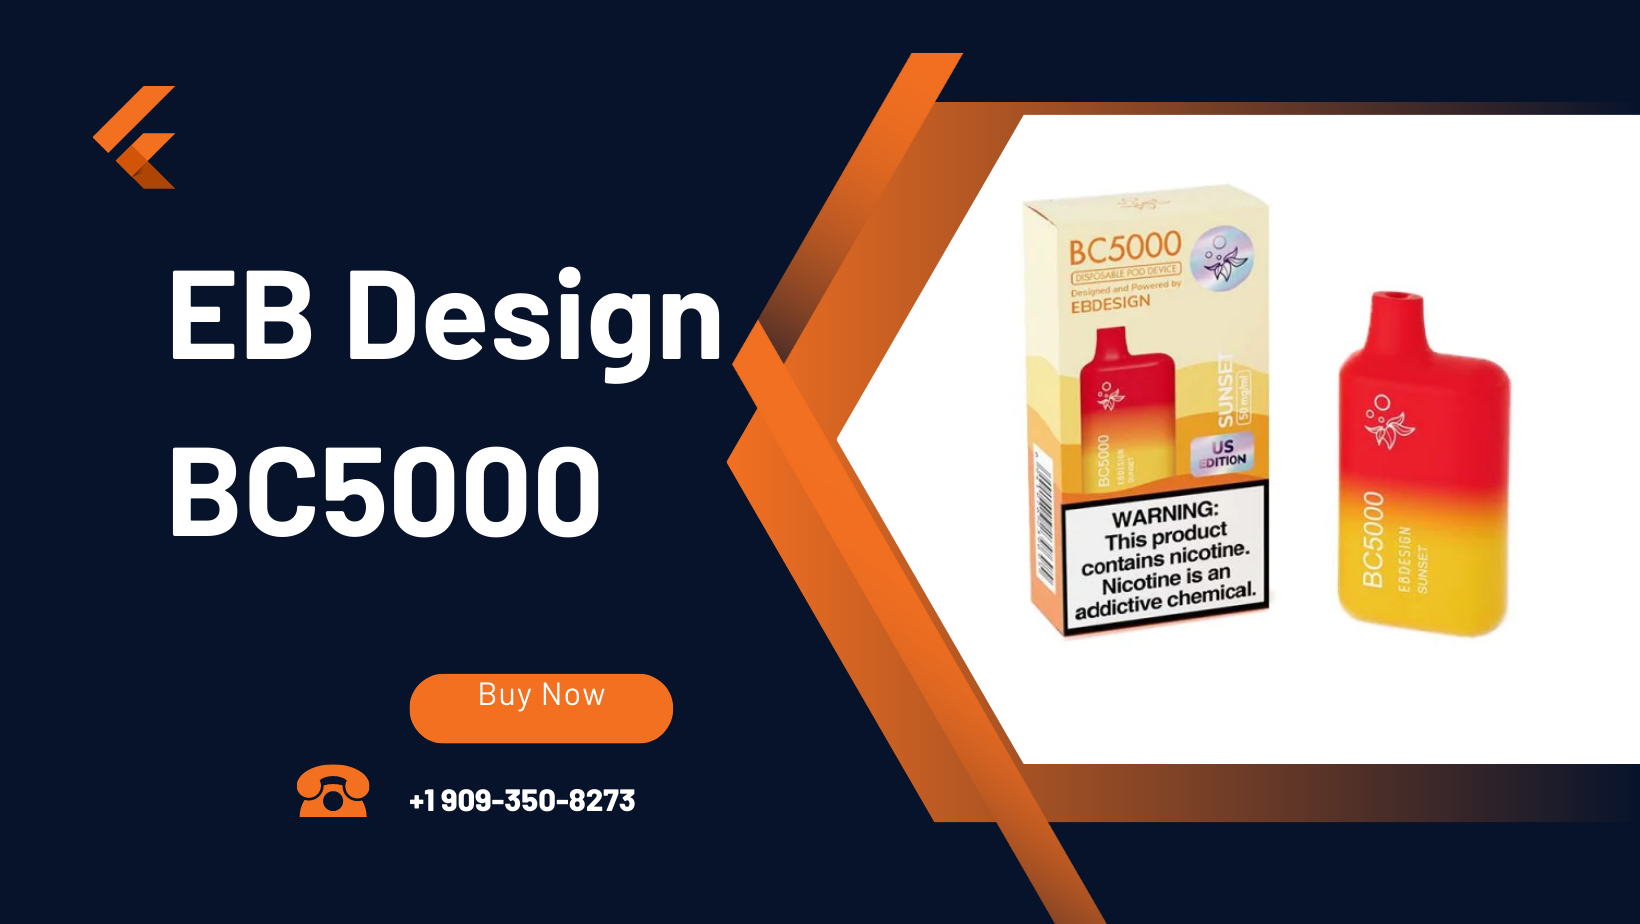 EB Design BC5000 Disposable Pod Device: Experience the Power and Convenience in a Compact Package.